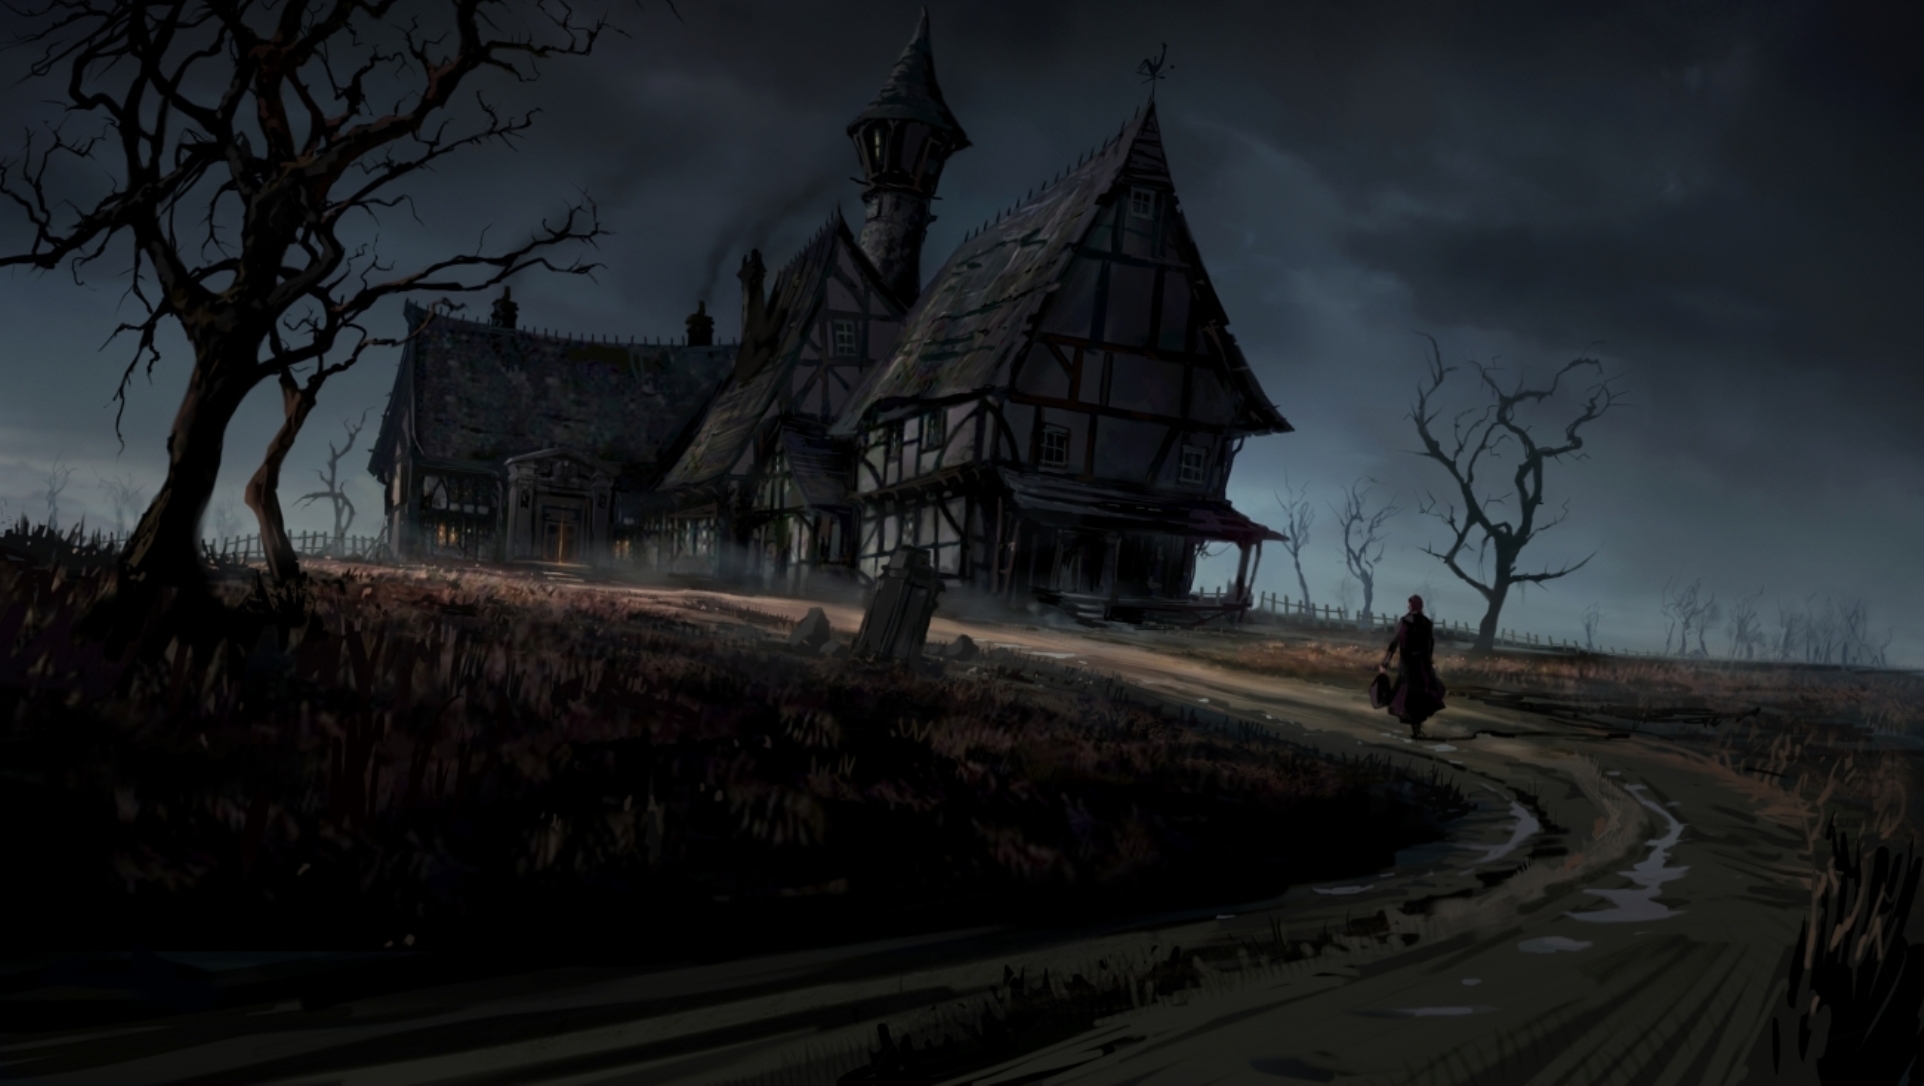 Free haunted house wallpaper background 1924x1086